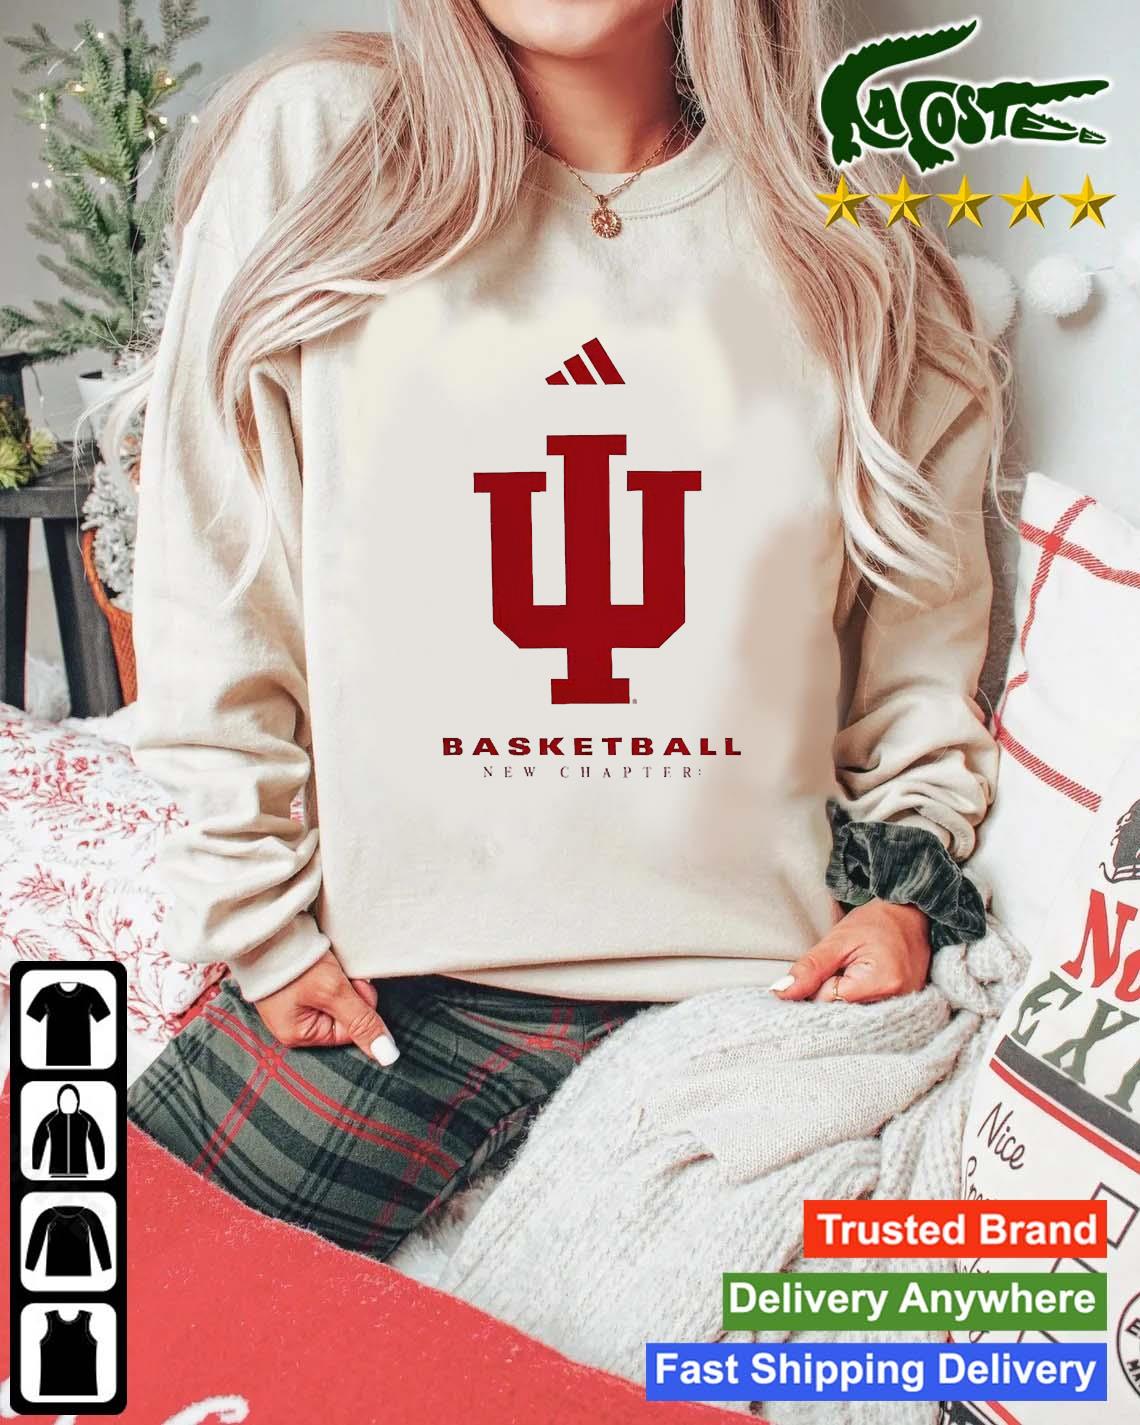 Indiana Hoosiers Adidas Basketball New Chapter T-s Mockup Sweater